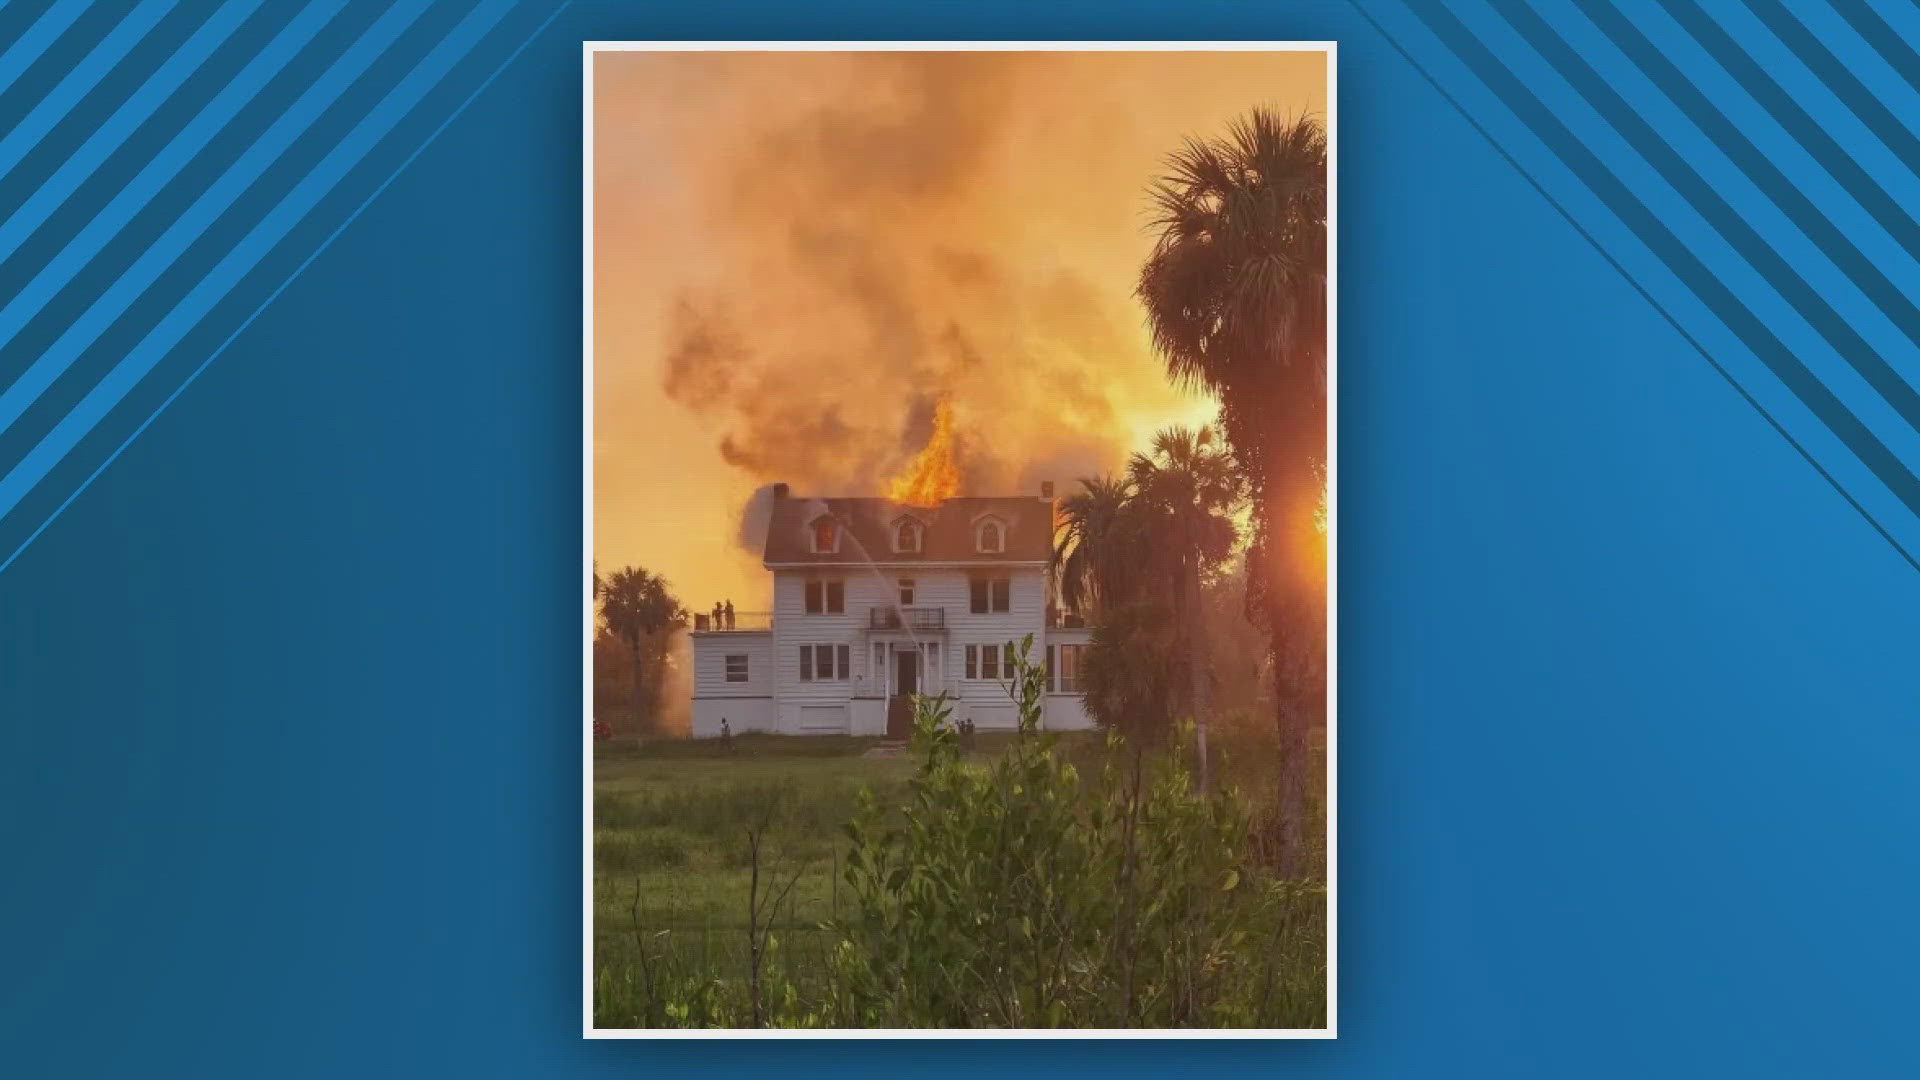 The house was on fire Wednesday night. First Coast News is working to learn more.